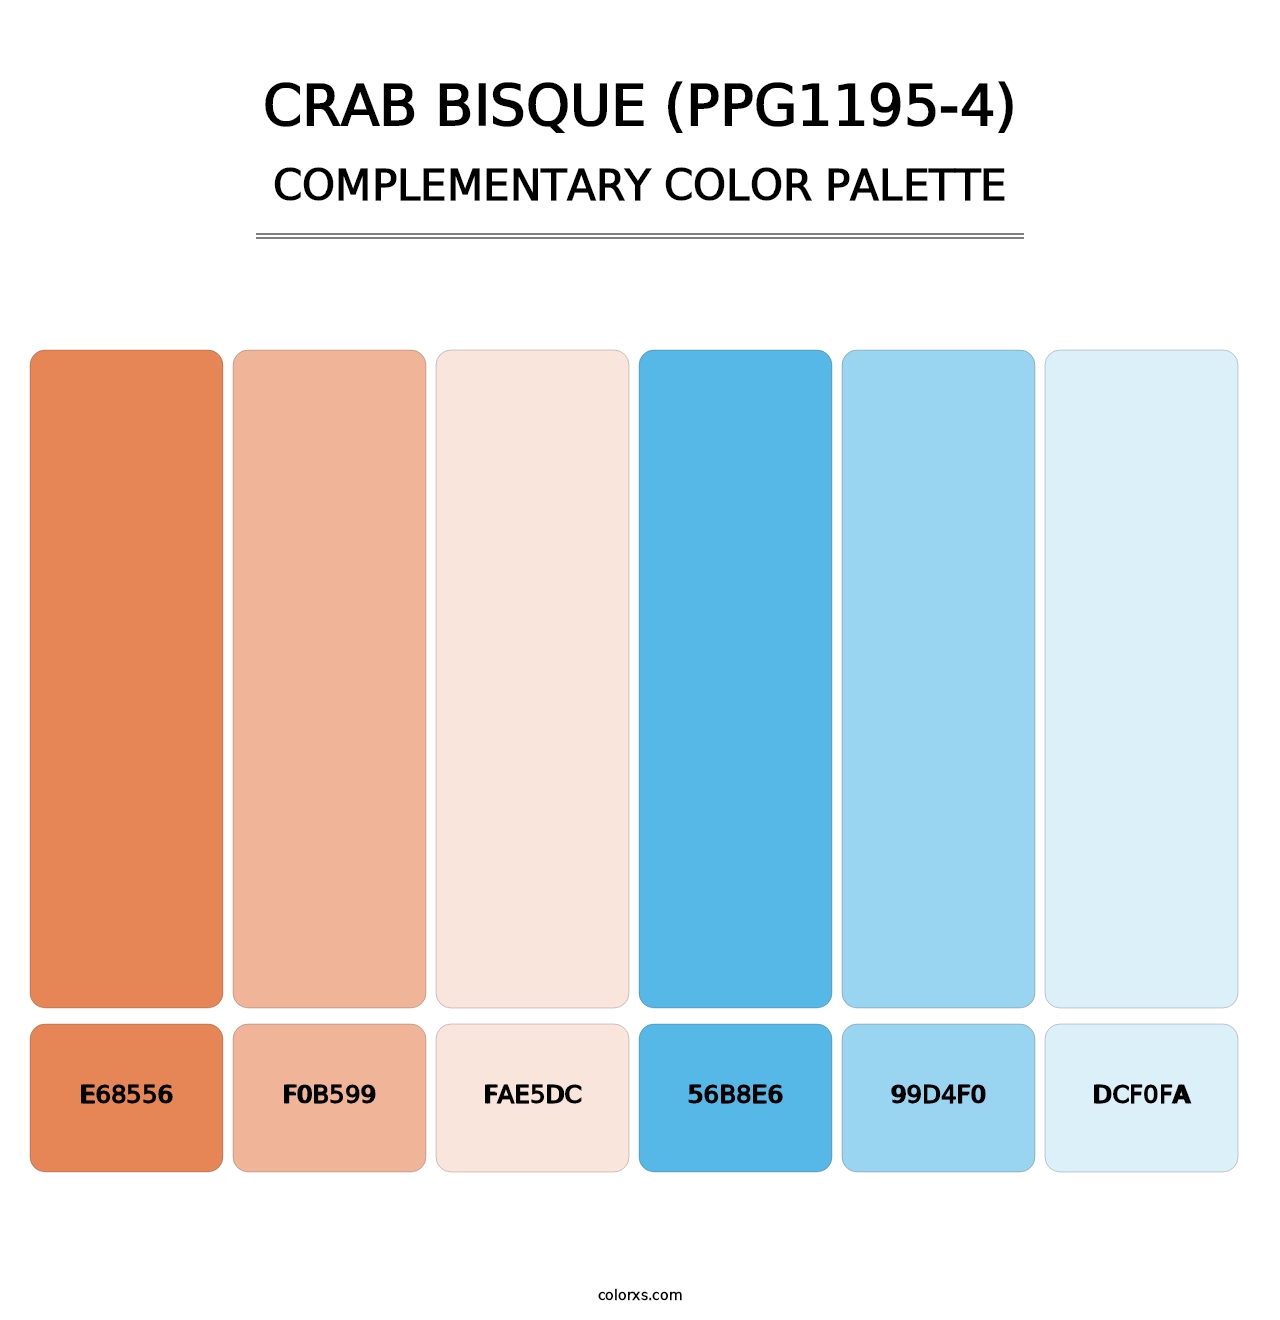 Crab Bisque (PPG1195-4) - Complementary Color Palette